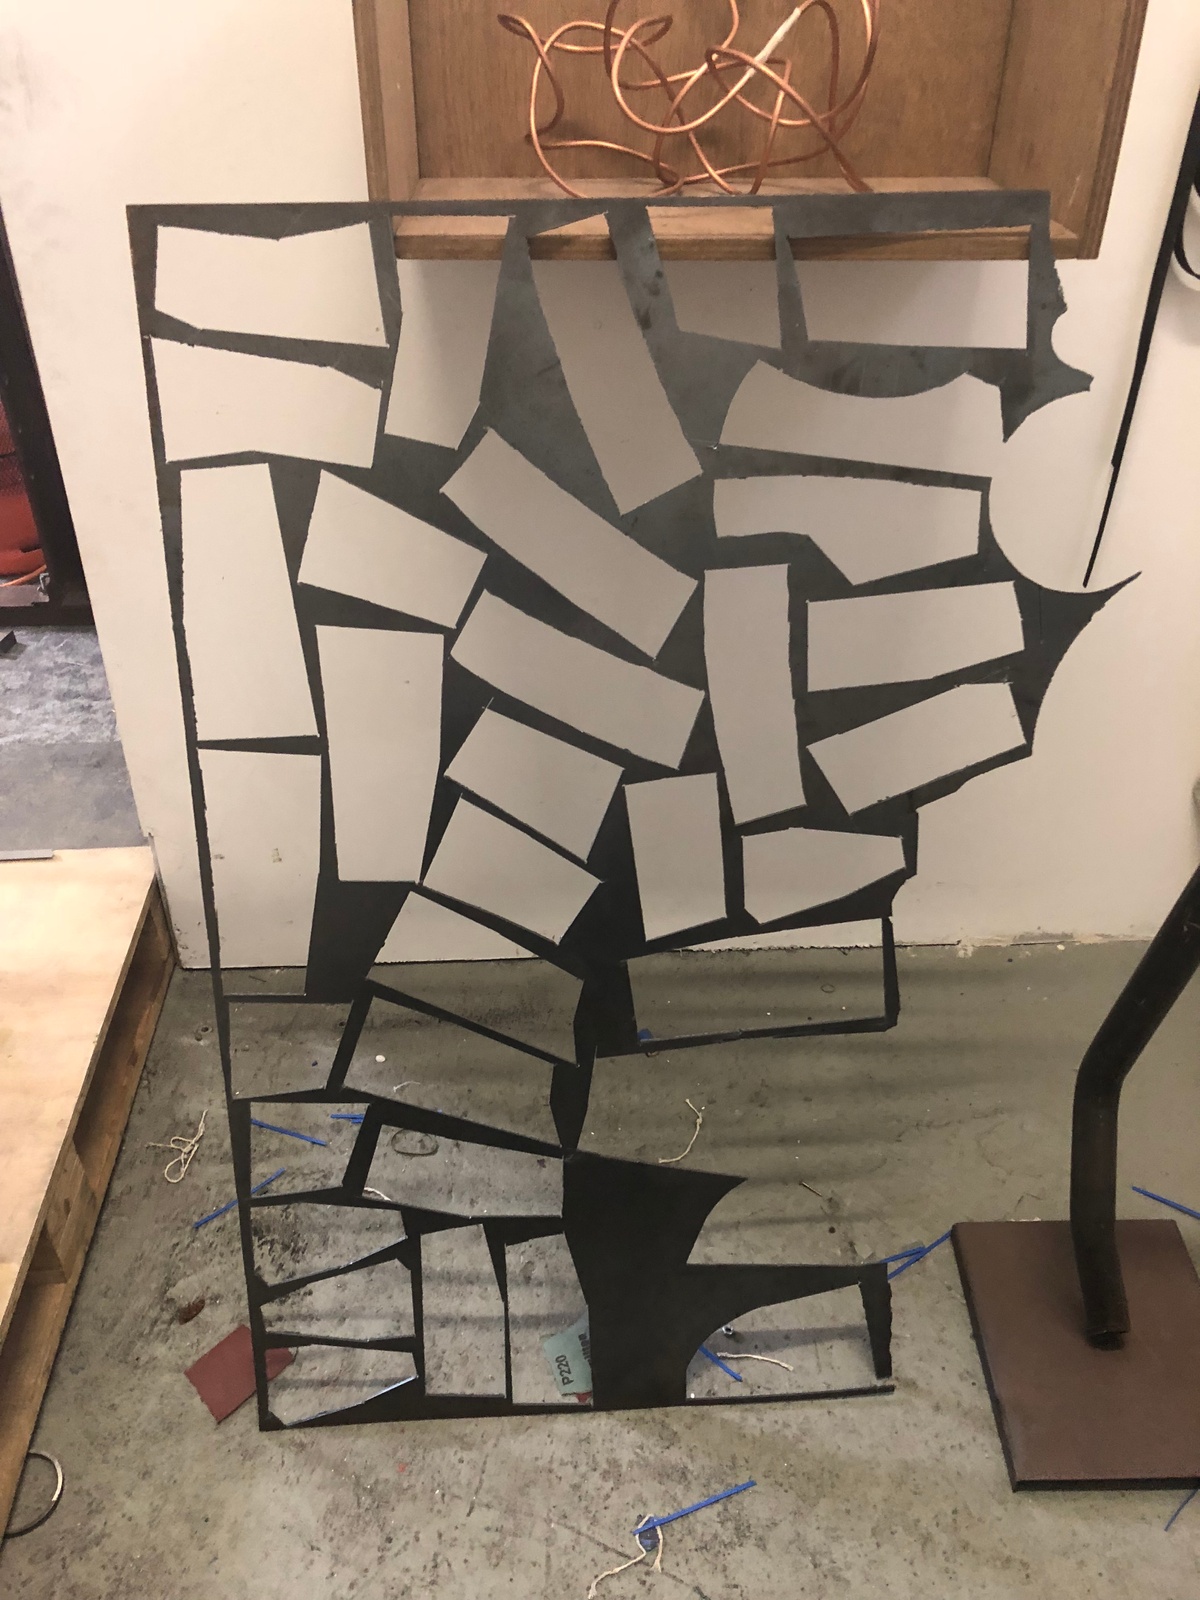 Process photograph from the More For Less exhibition in A4’s Gallery that depicts a sheet of metal with multiple cutouts by Kyle Morland.
